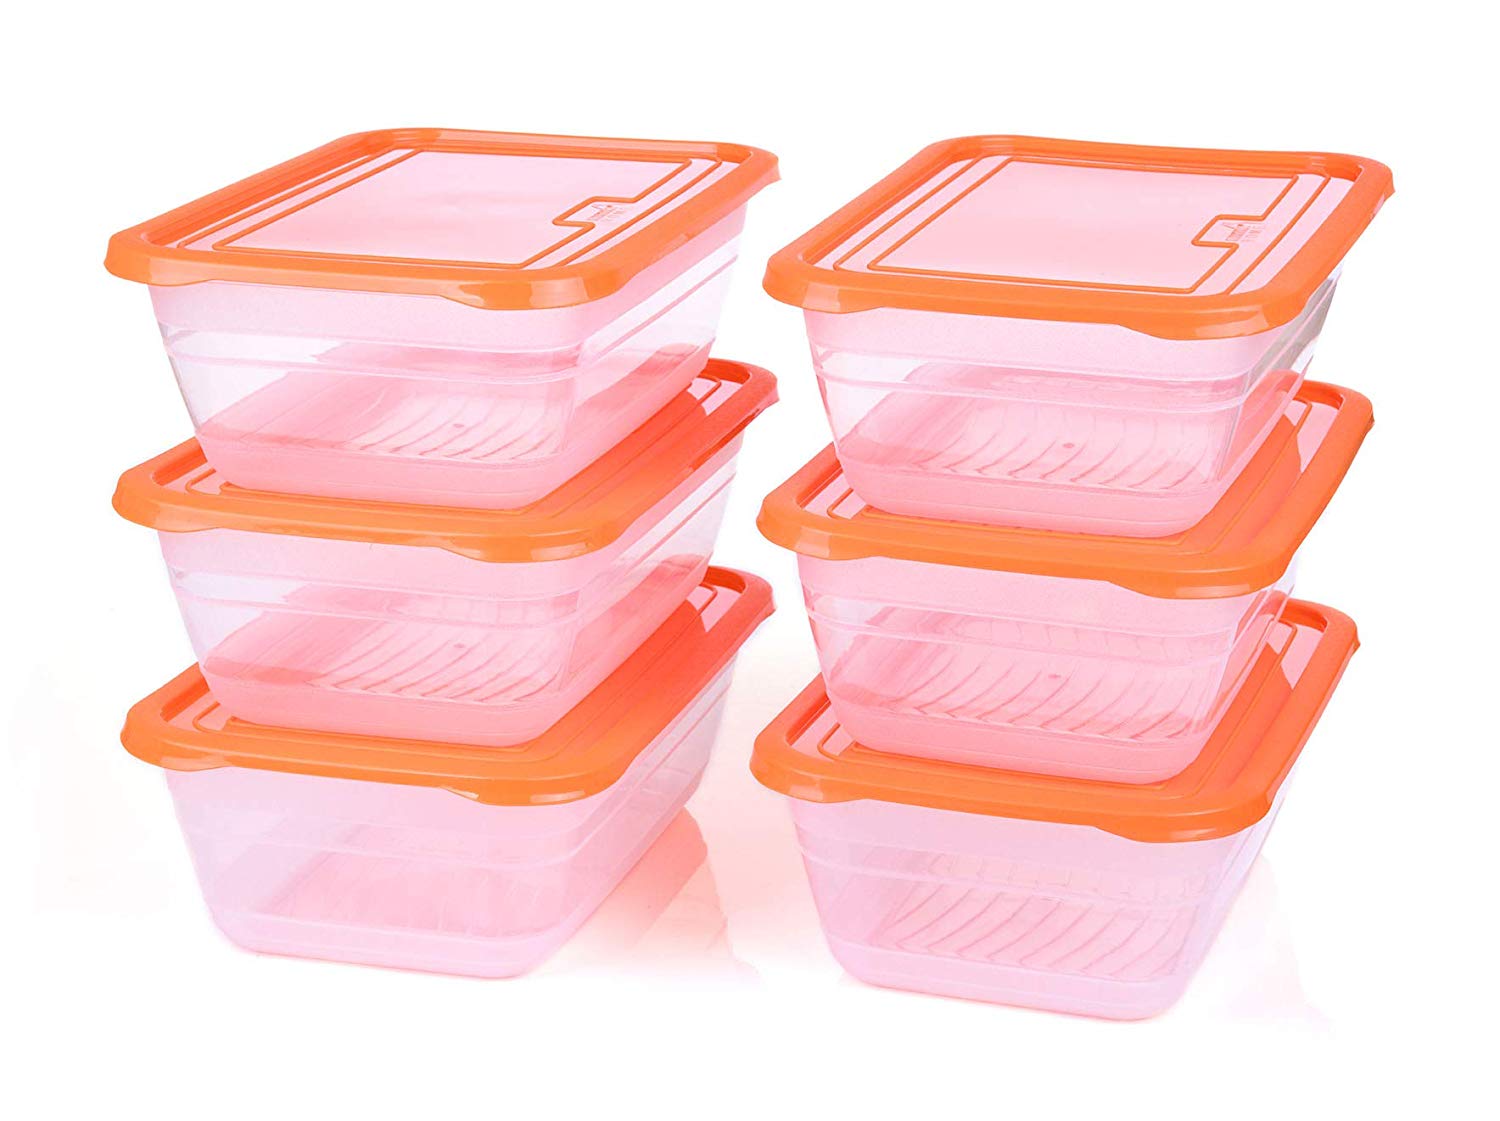 Food Storage Containers with Lids - Plastic Nesting Containers for Food -  BPA Free Stackable Storage Containers for Kitchen - Pink Microwave Safe